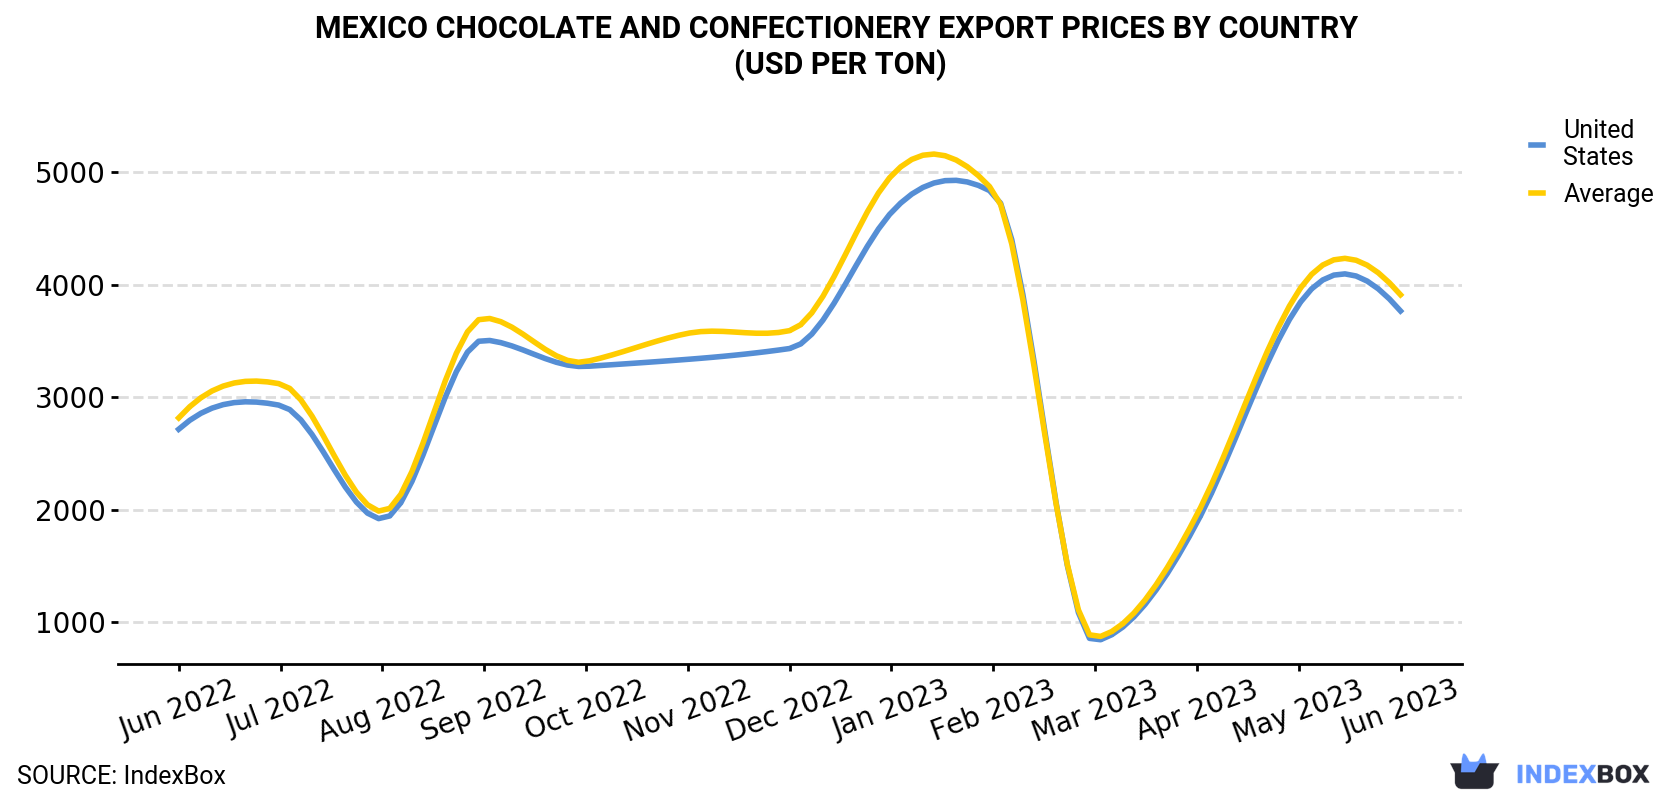 Mexico Chocolate And Confectionery Export Prices By Country (USD Per Ton)